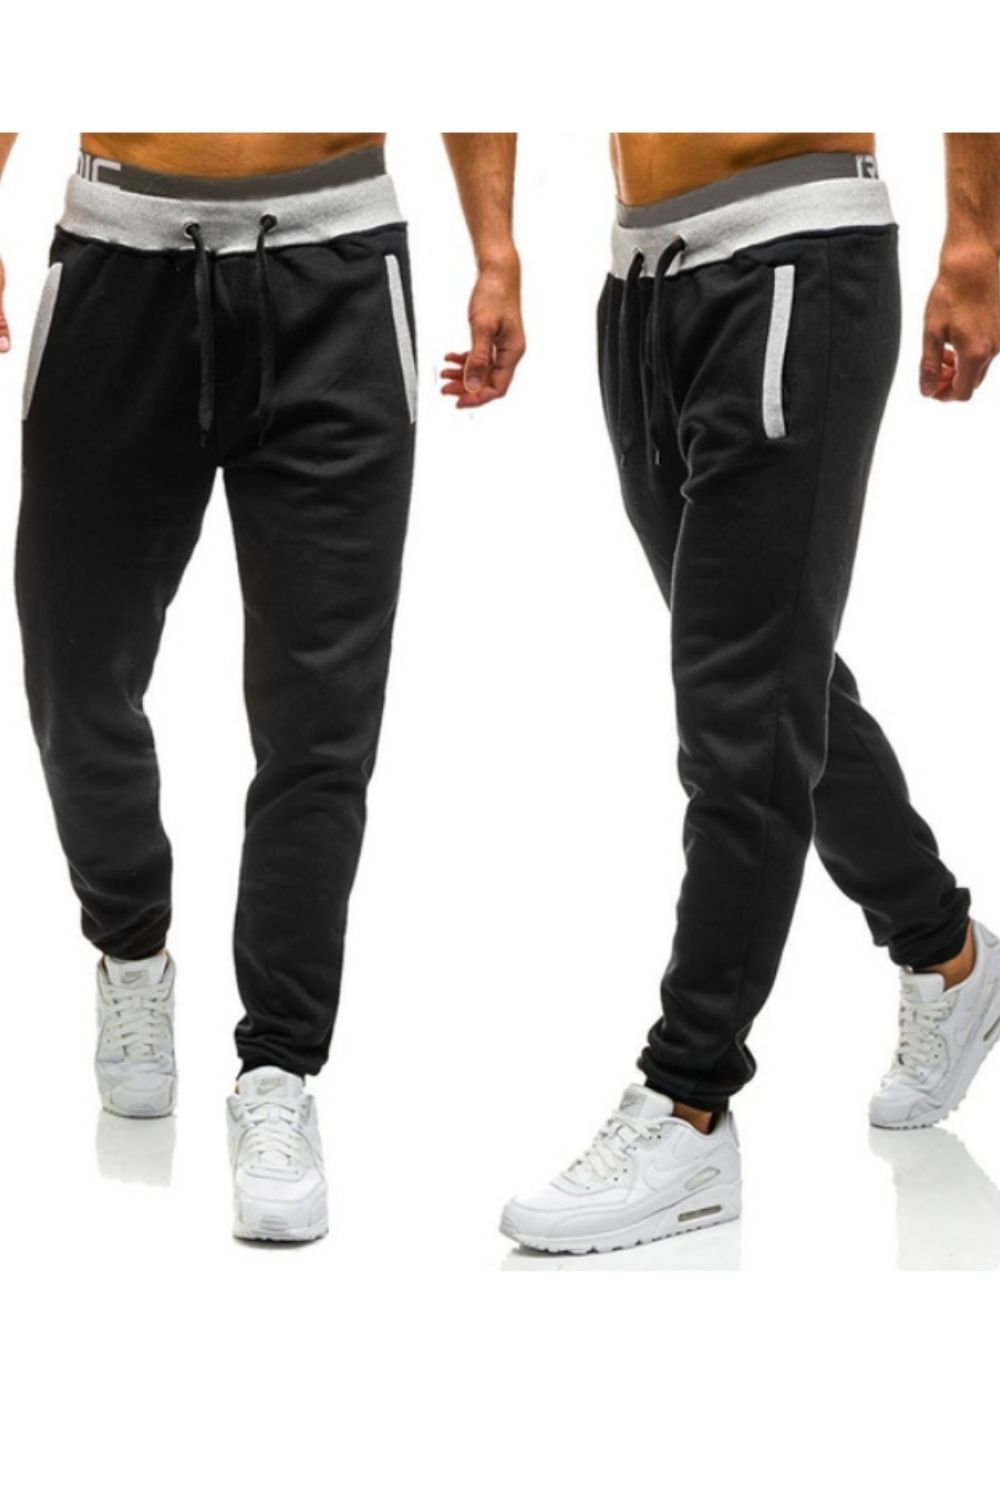 White Waist With Black Jogger